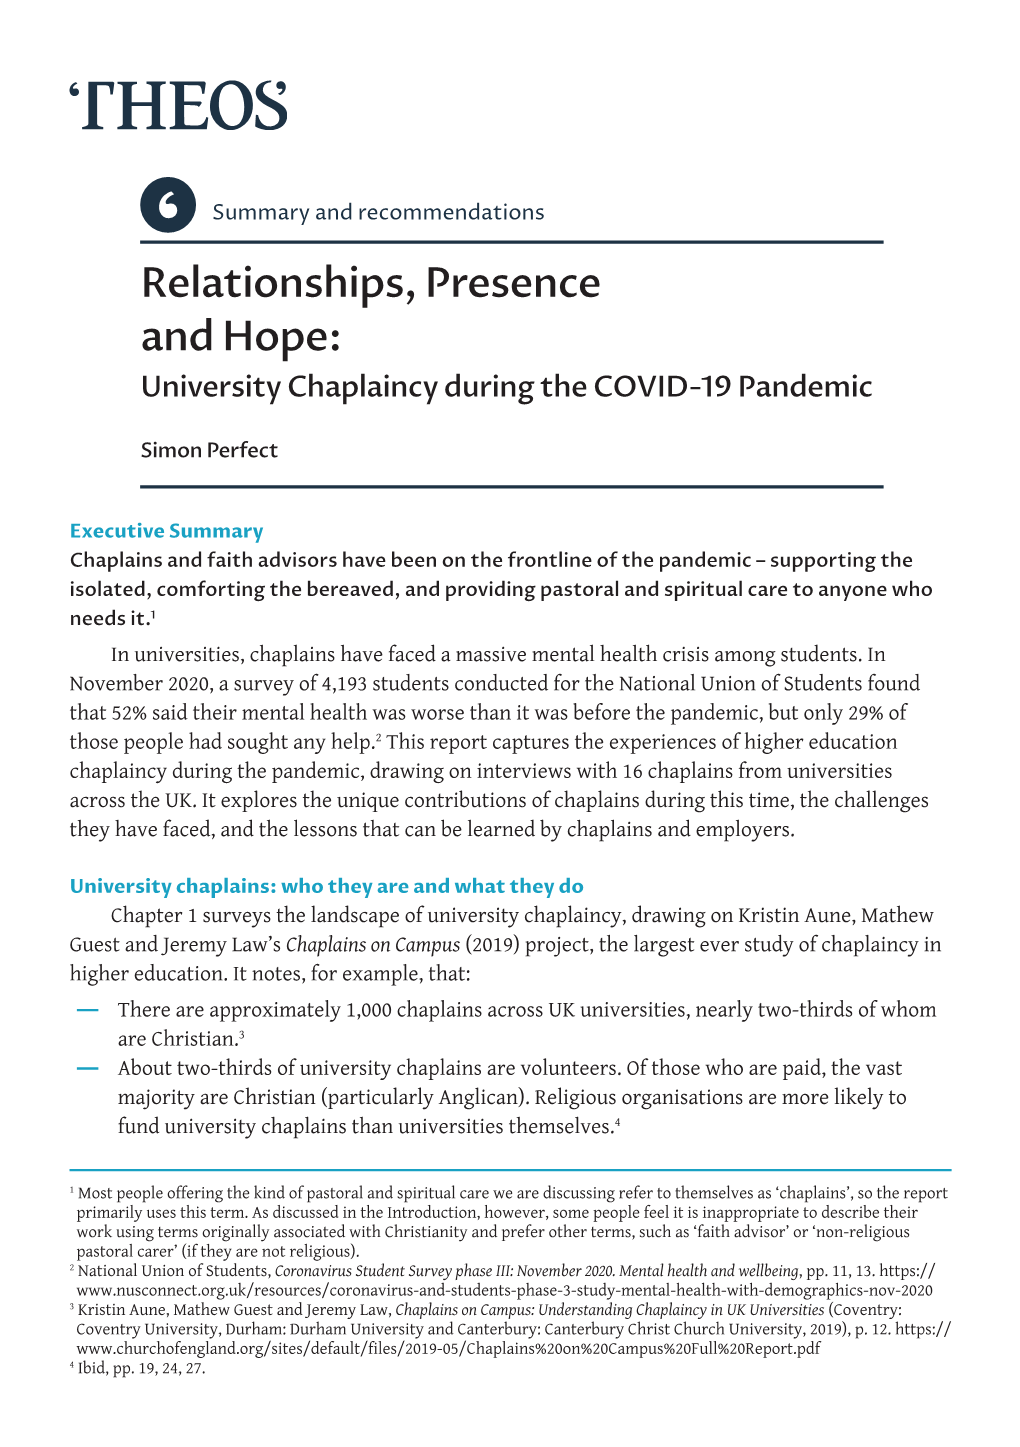 Relationships, Presence and Hope: University Chaplaincy During the COVID-19 Pandemic